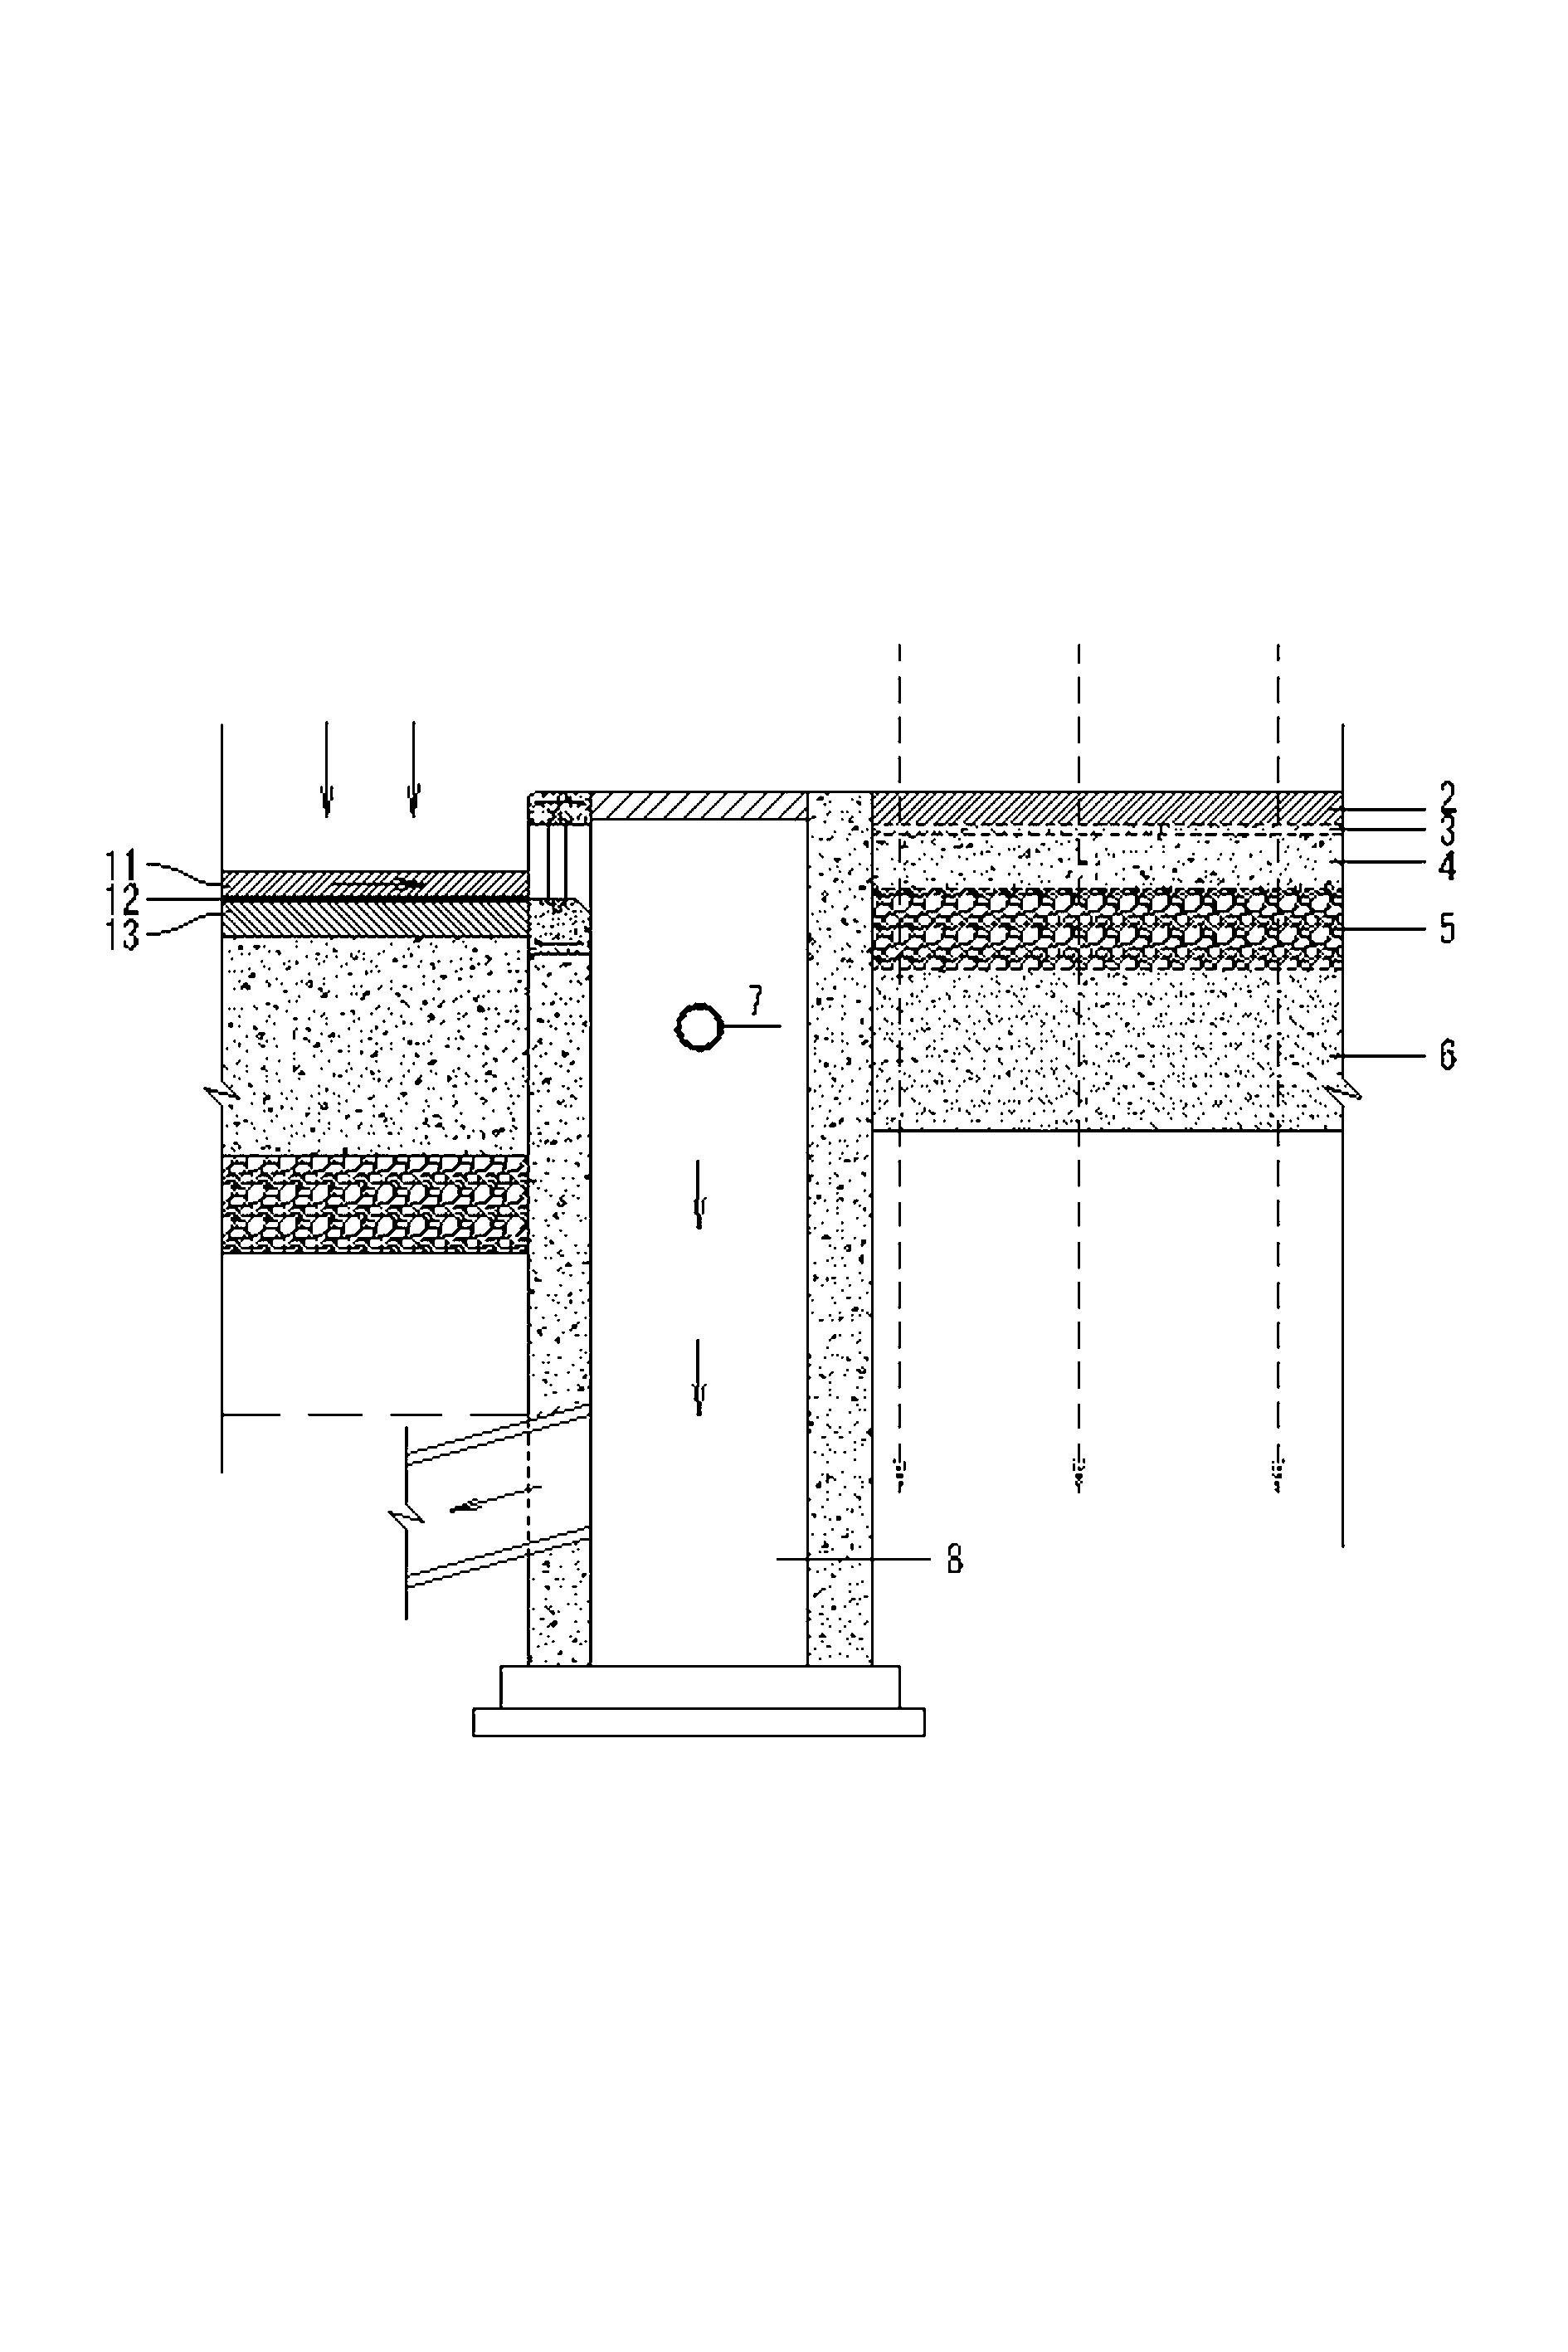 Road pavement draining method and drainage structure system